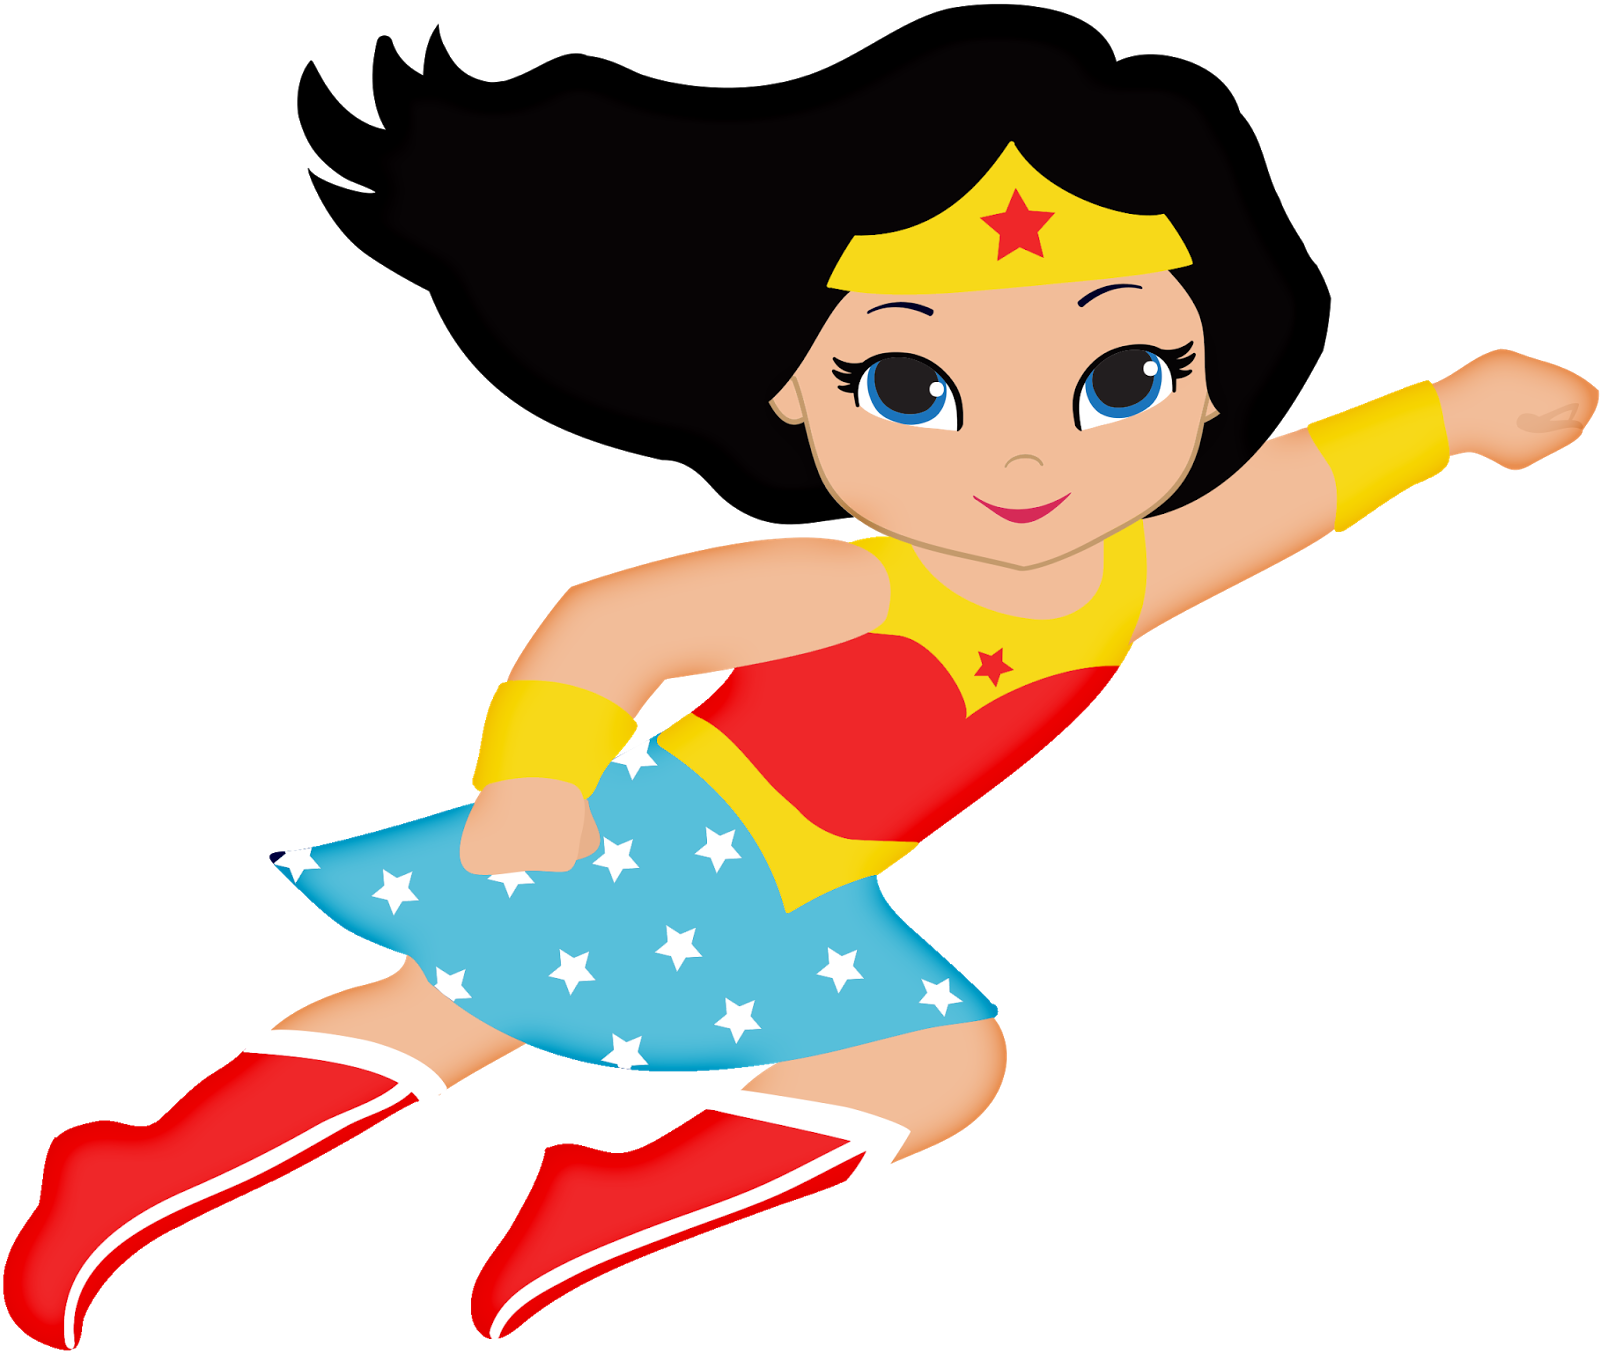 Pin by on wonder. Clipart computer superhero